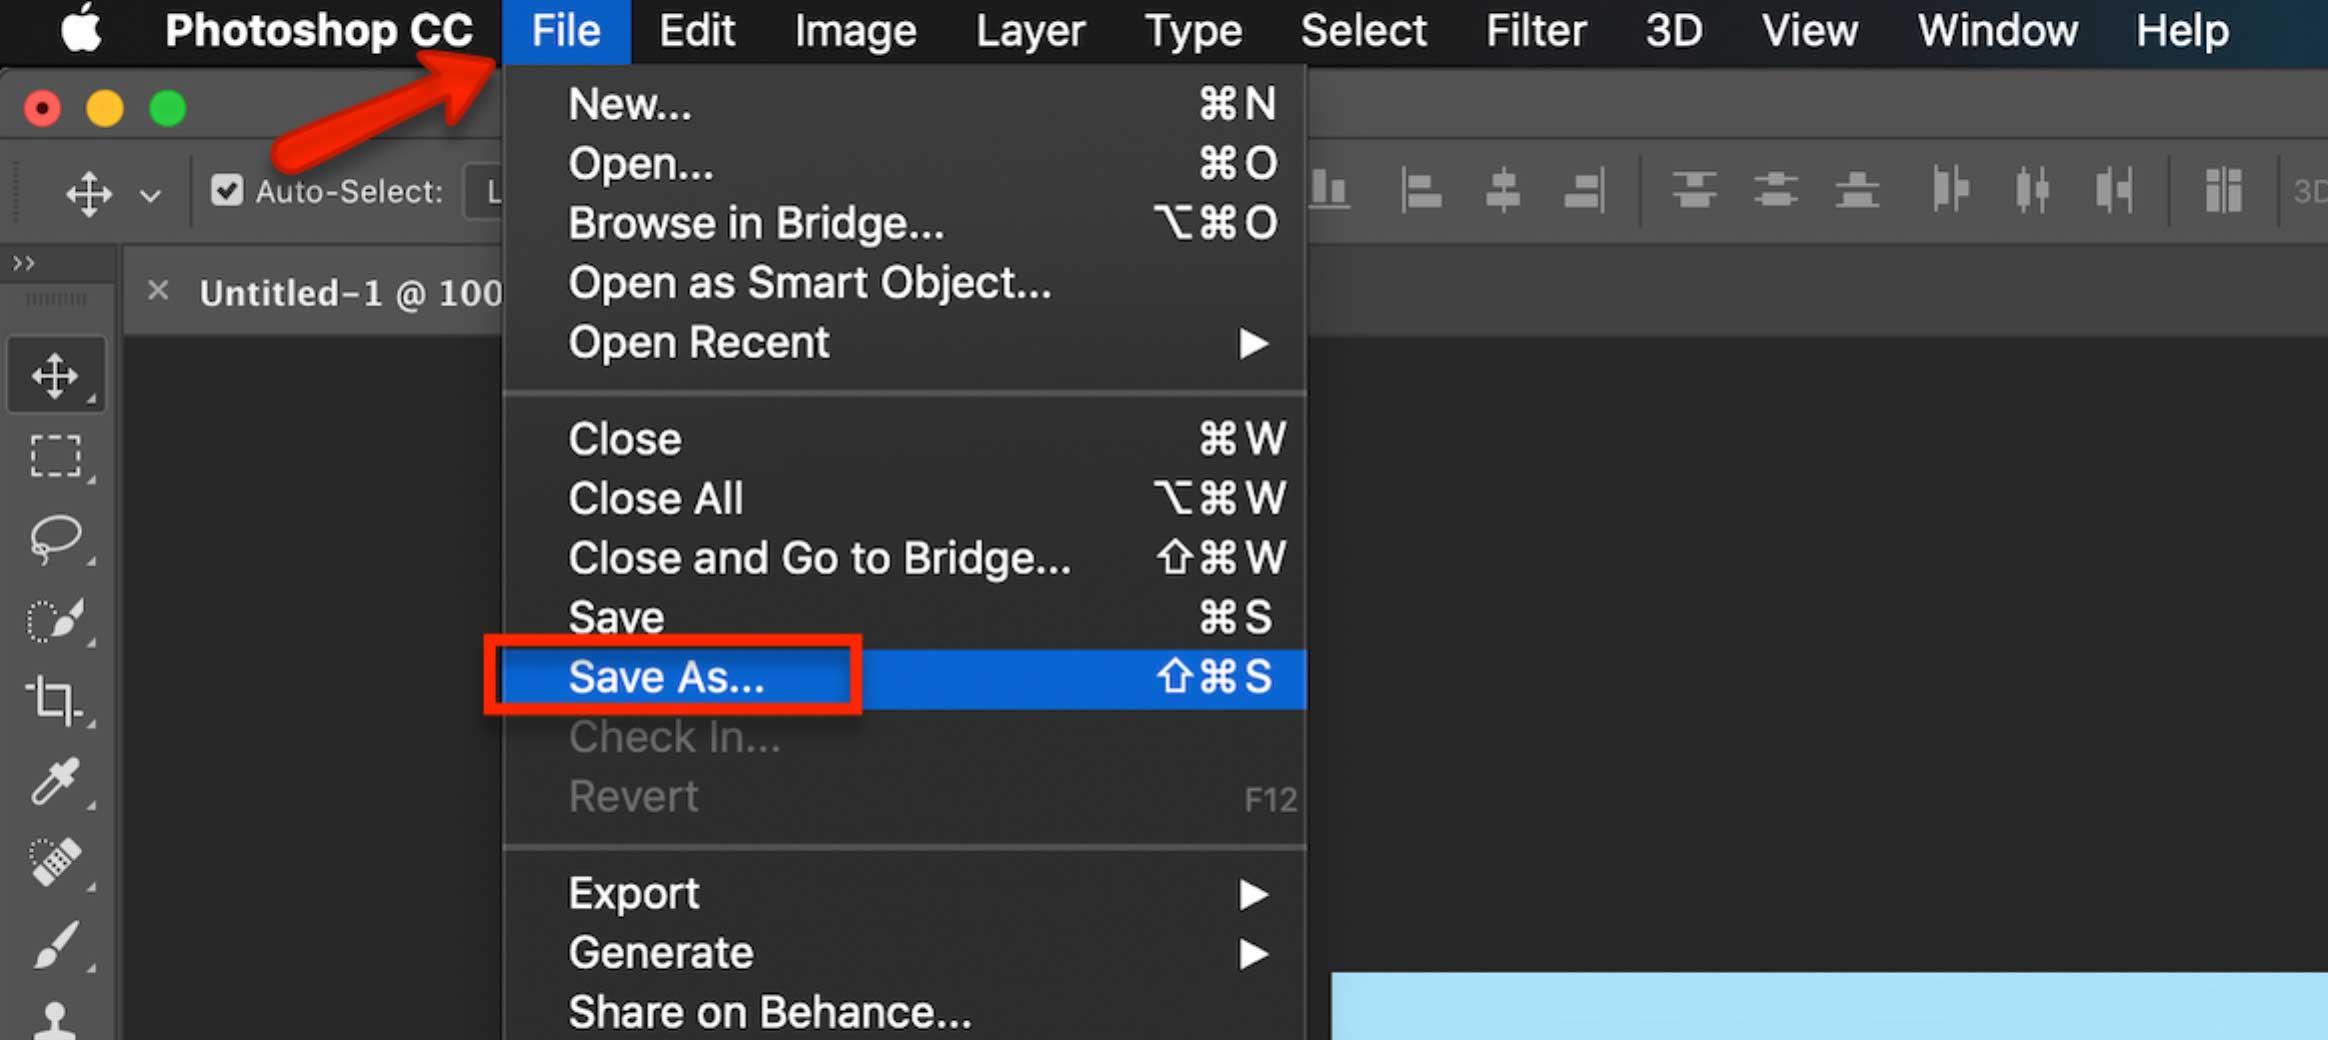 Photoshop Commands - Saving as